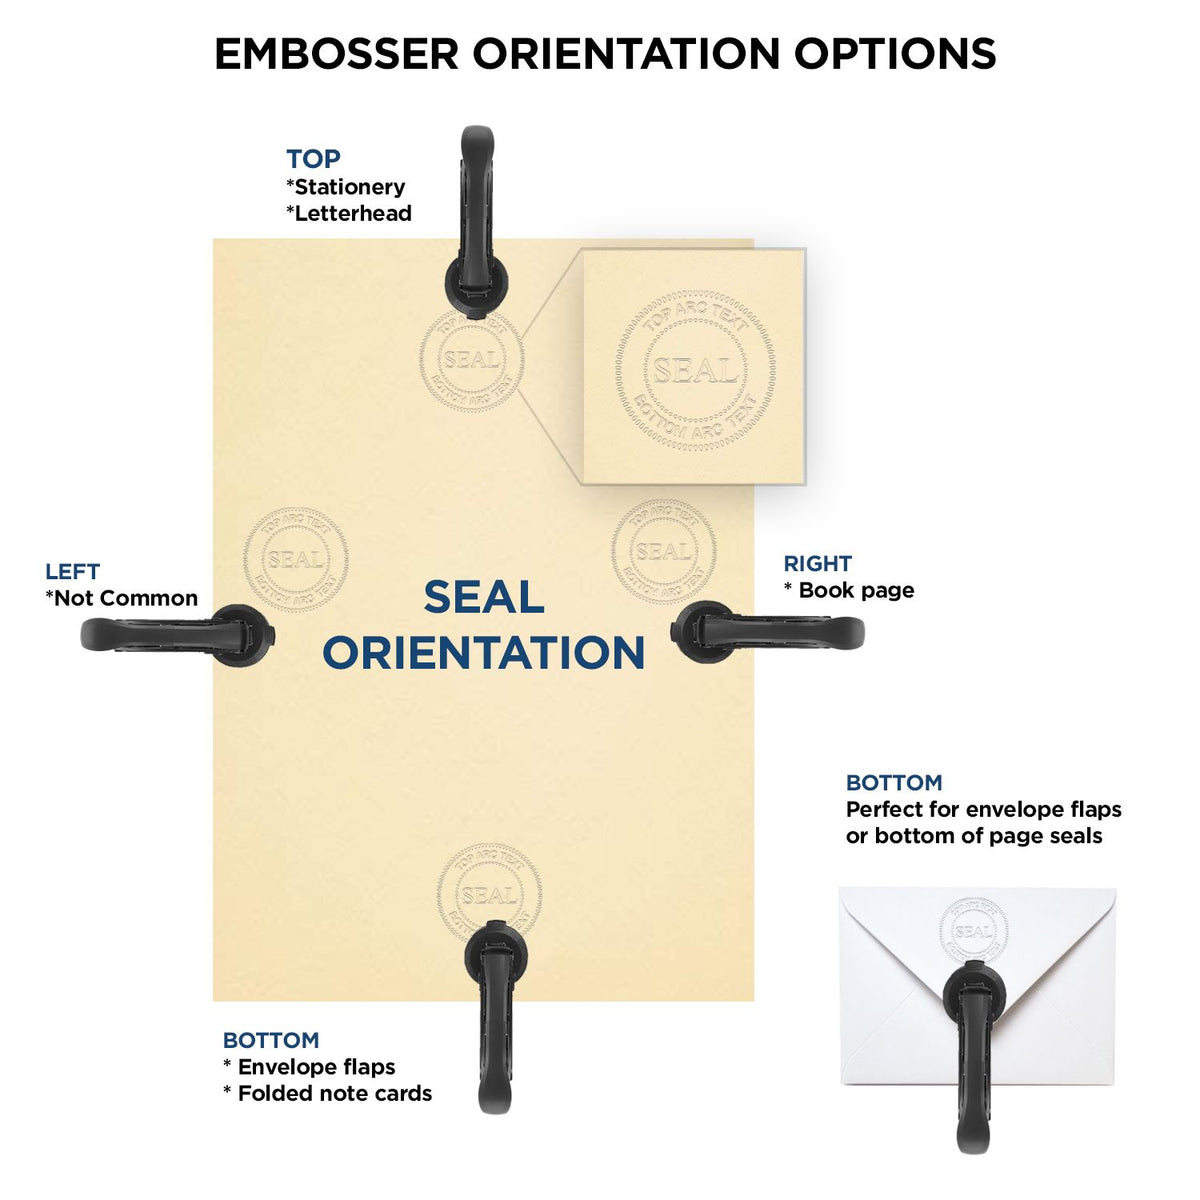 An infographic for the Gift Arkansas Engineer Seal showing embosser orientation, this is showing examples of a top, bottom, right and left insert.